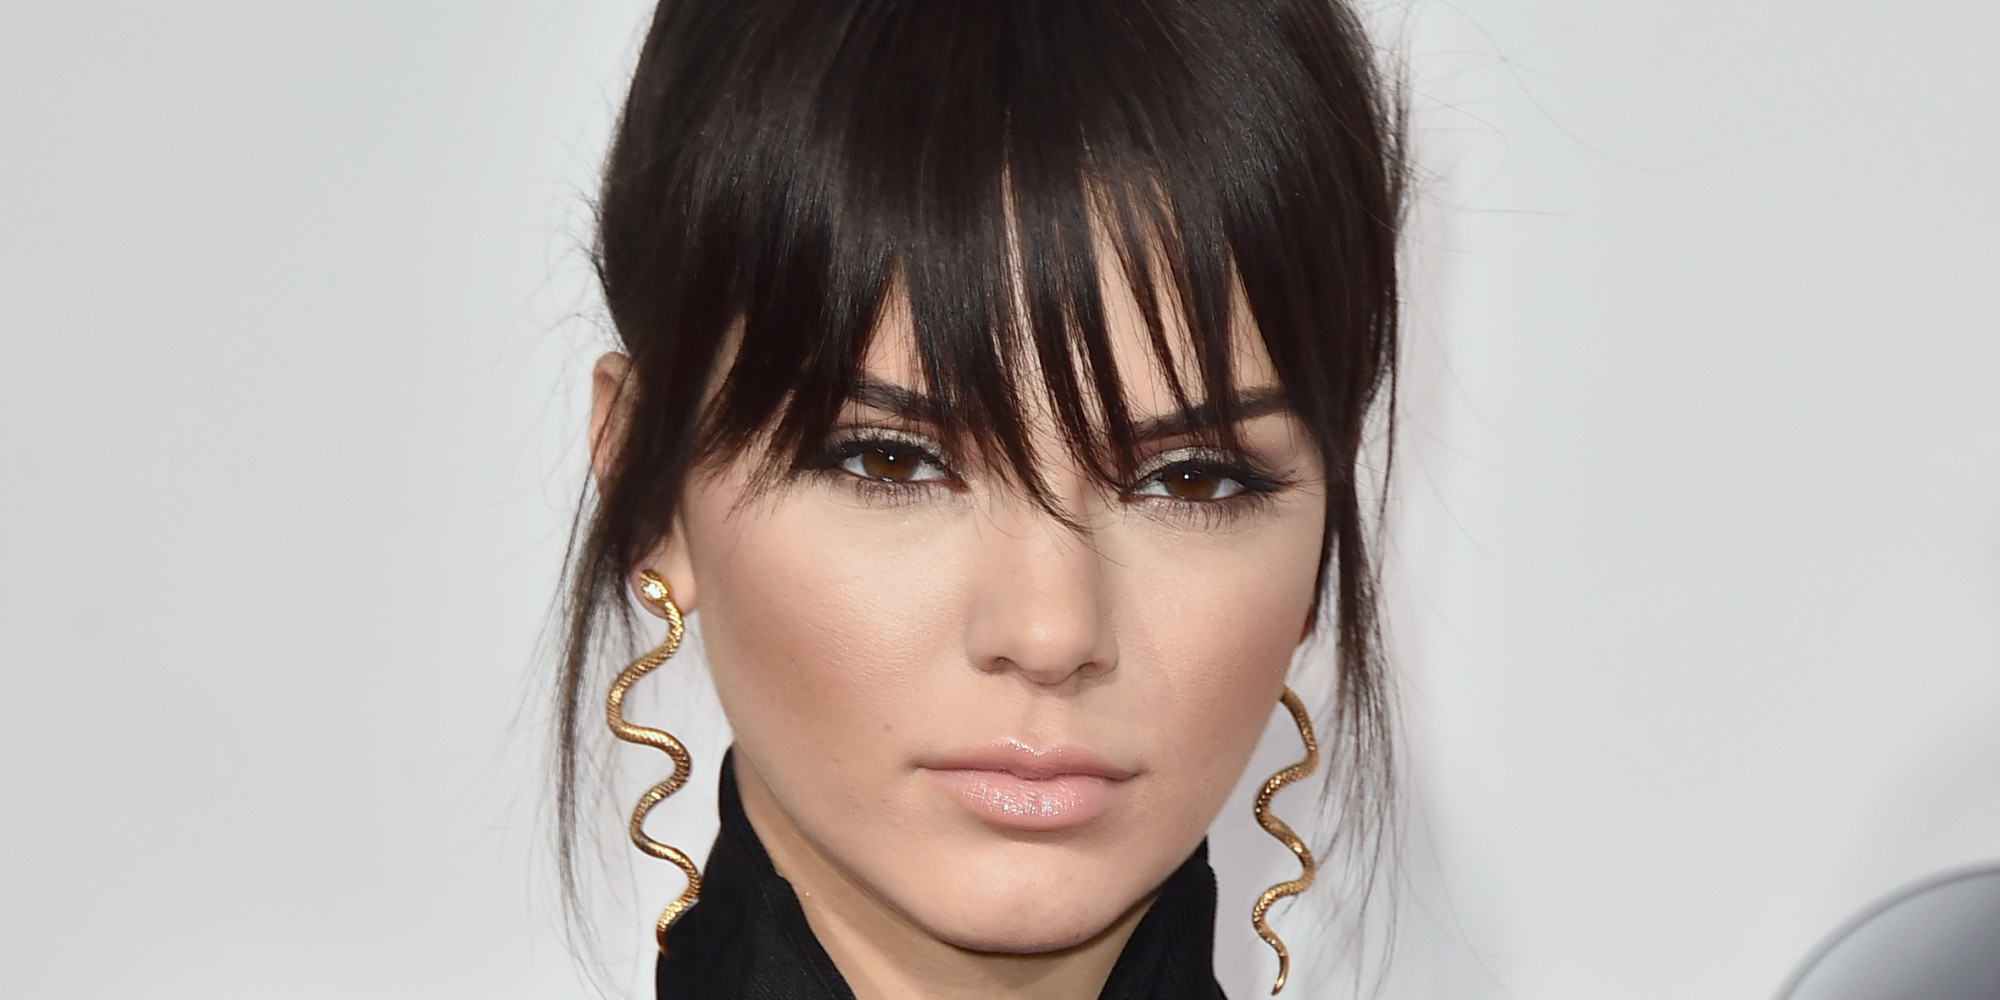 American Music Awards 2015 Kendall Jenner Shows Off Sultry New Fringe